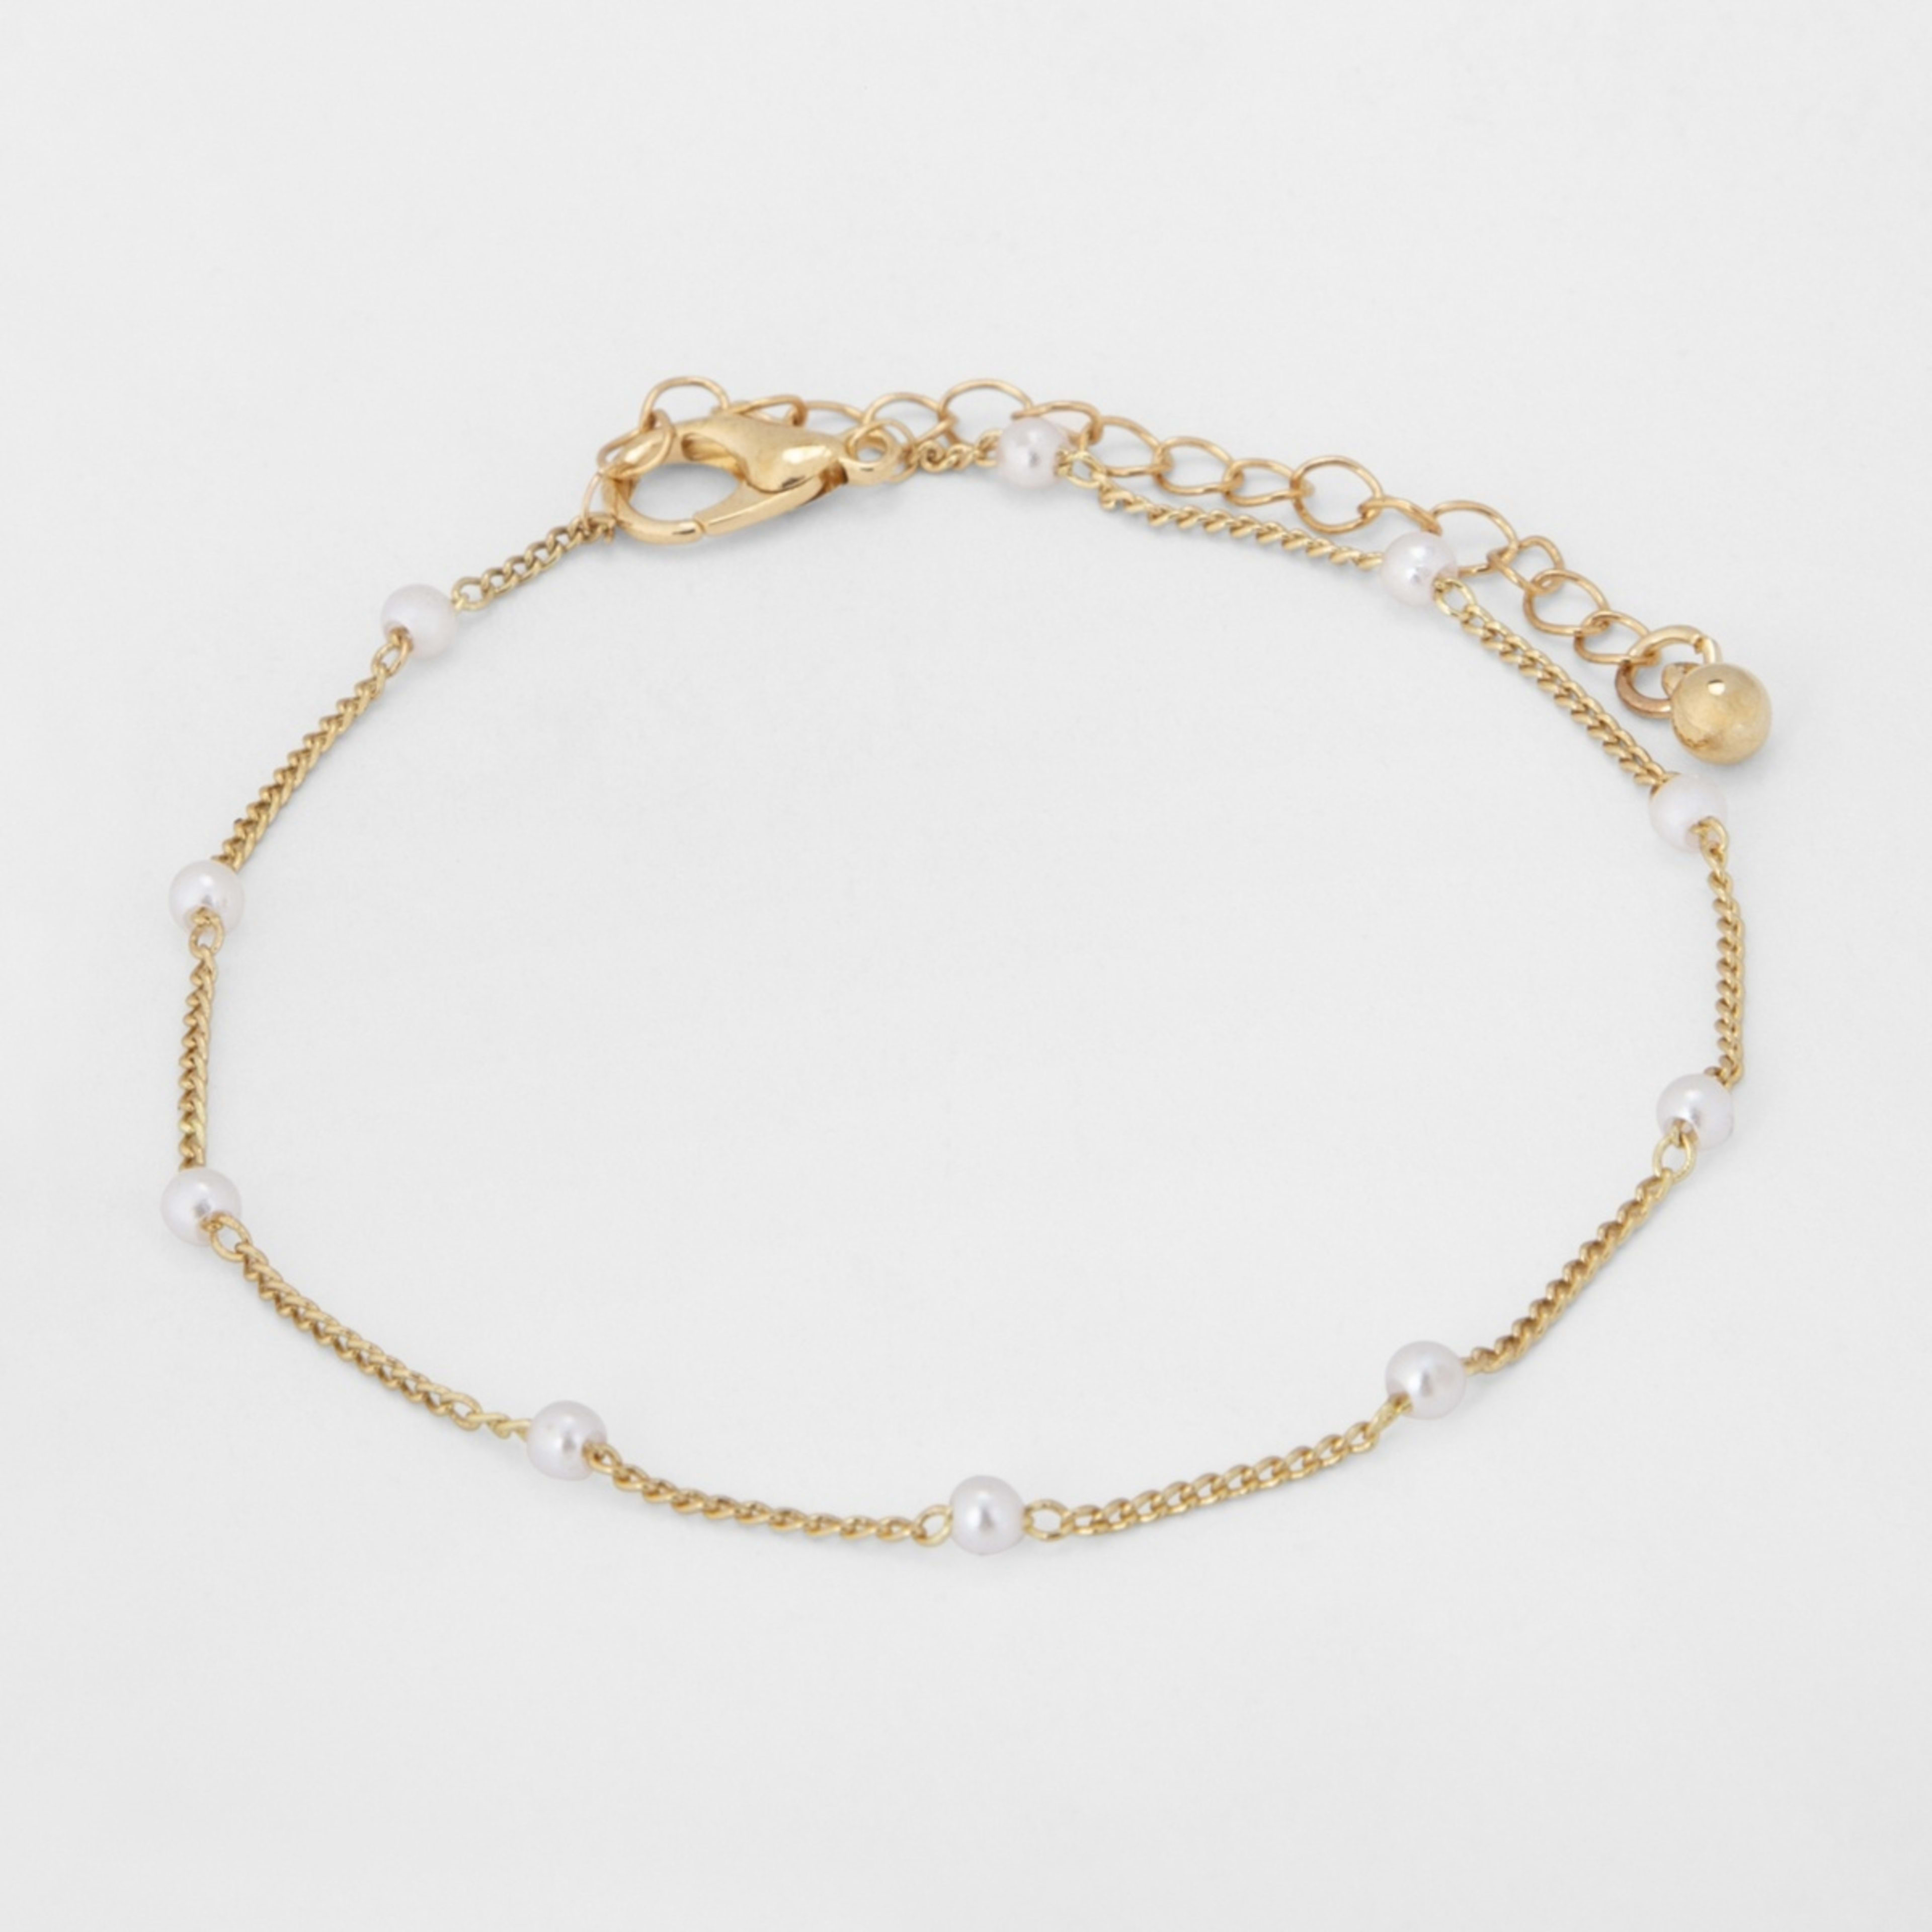 5 Pack Chain and Diamante Bracelet - Gold Tone - Kmart